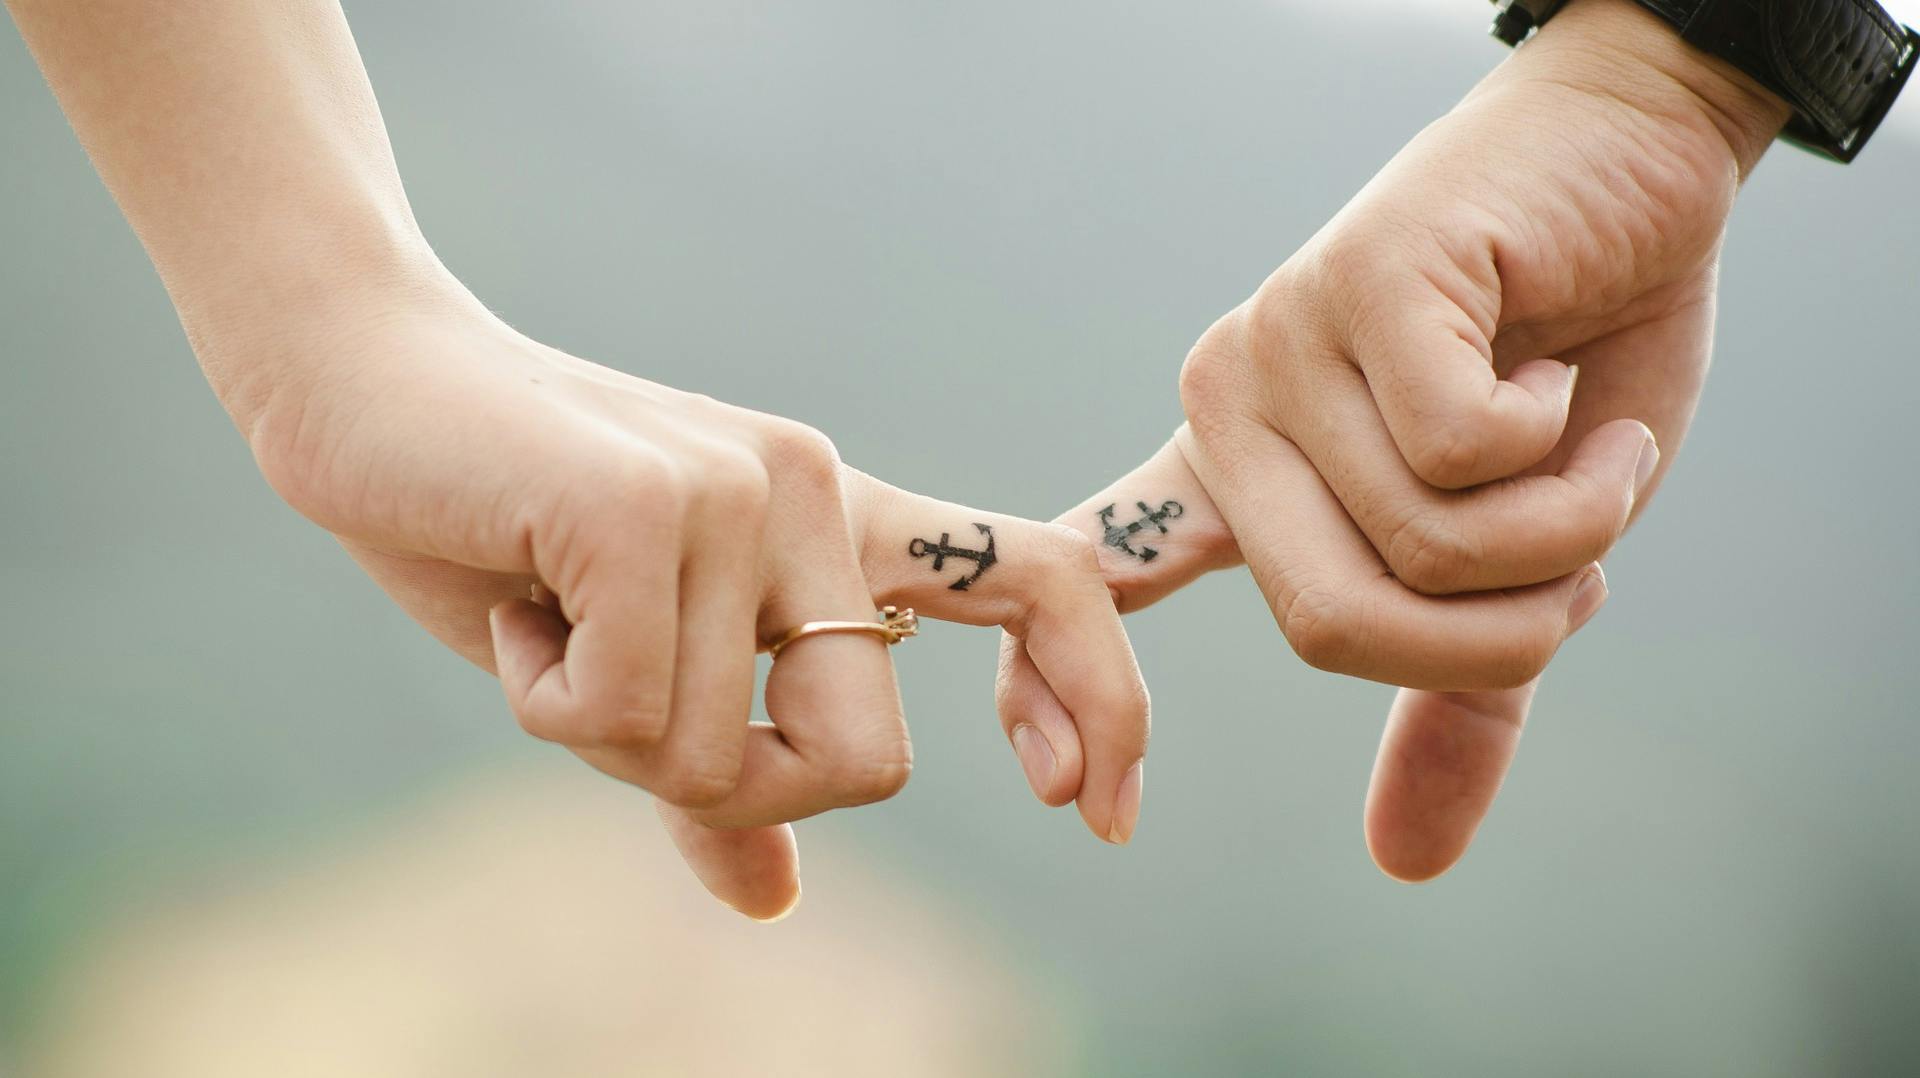 Couple with anchor finger tattoos holding hands